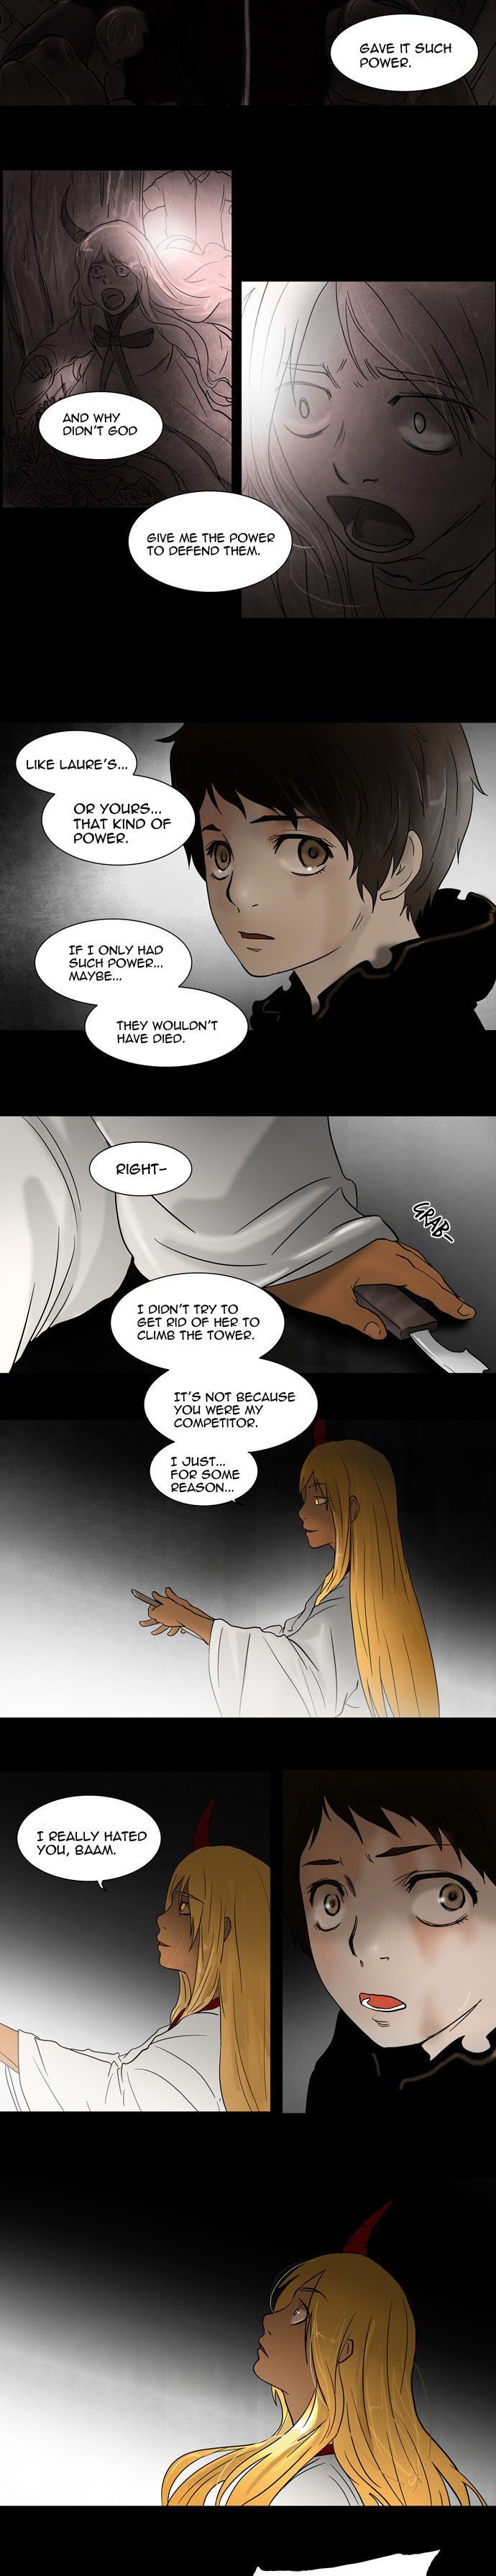 Tower of God 49